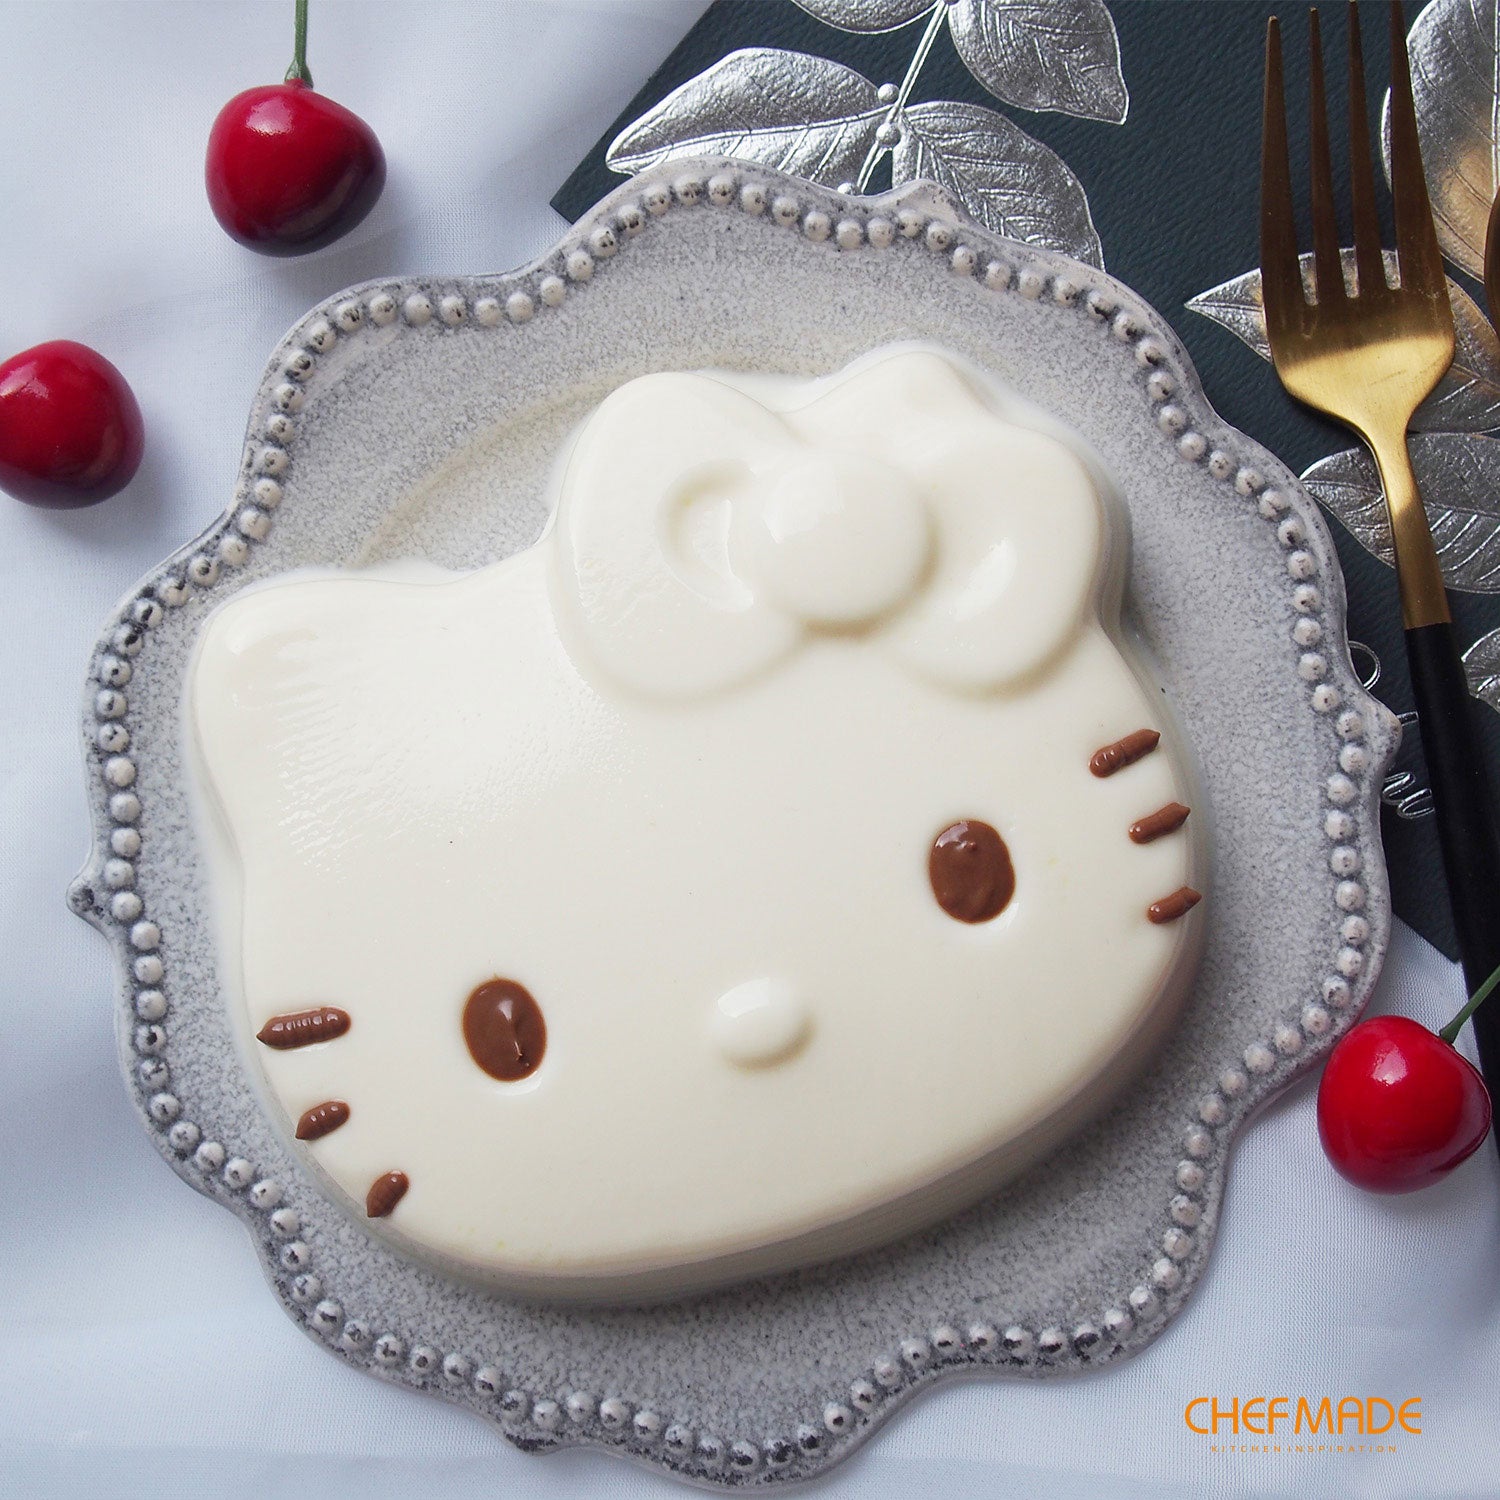 Amazon.com: CHEFMADE Hello Kitty Cake Pan,8-Inch Non-Stick Silicone Cake  Mold for Oven and Instant Pot Baking (Pink): Home & Kitchen